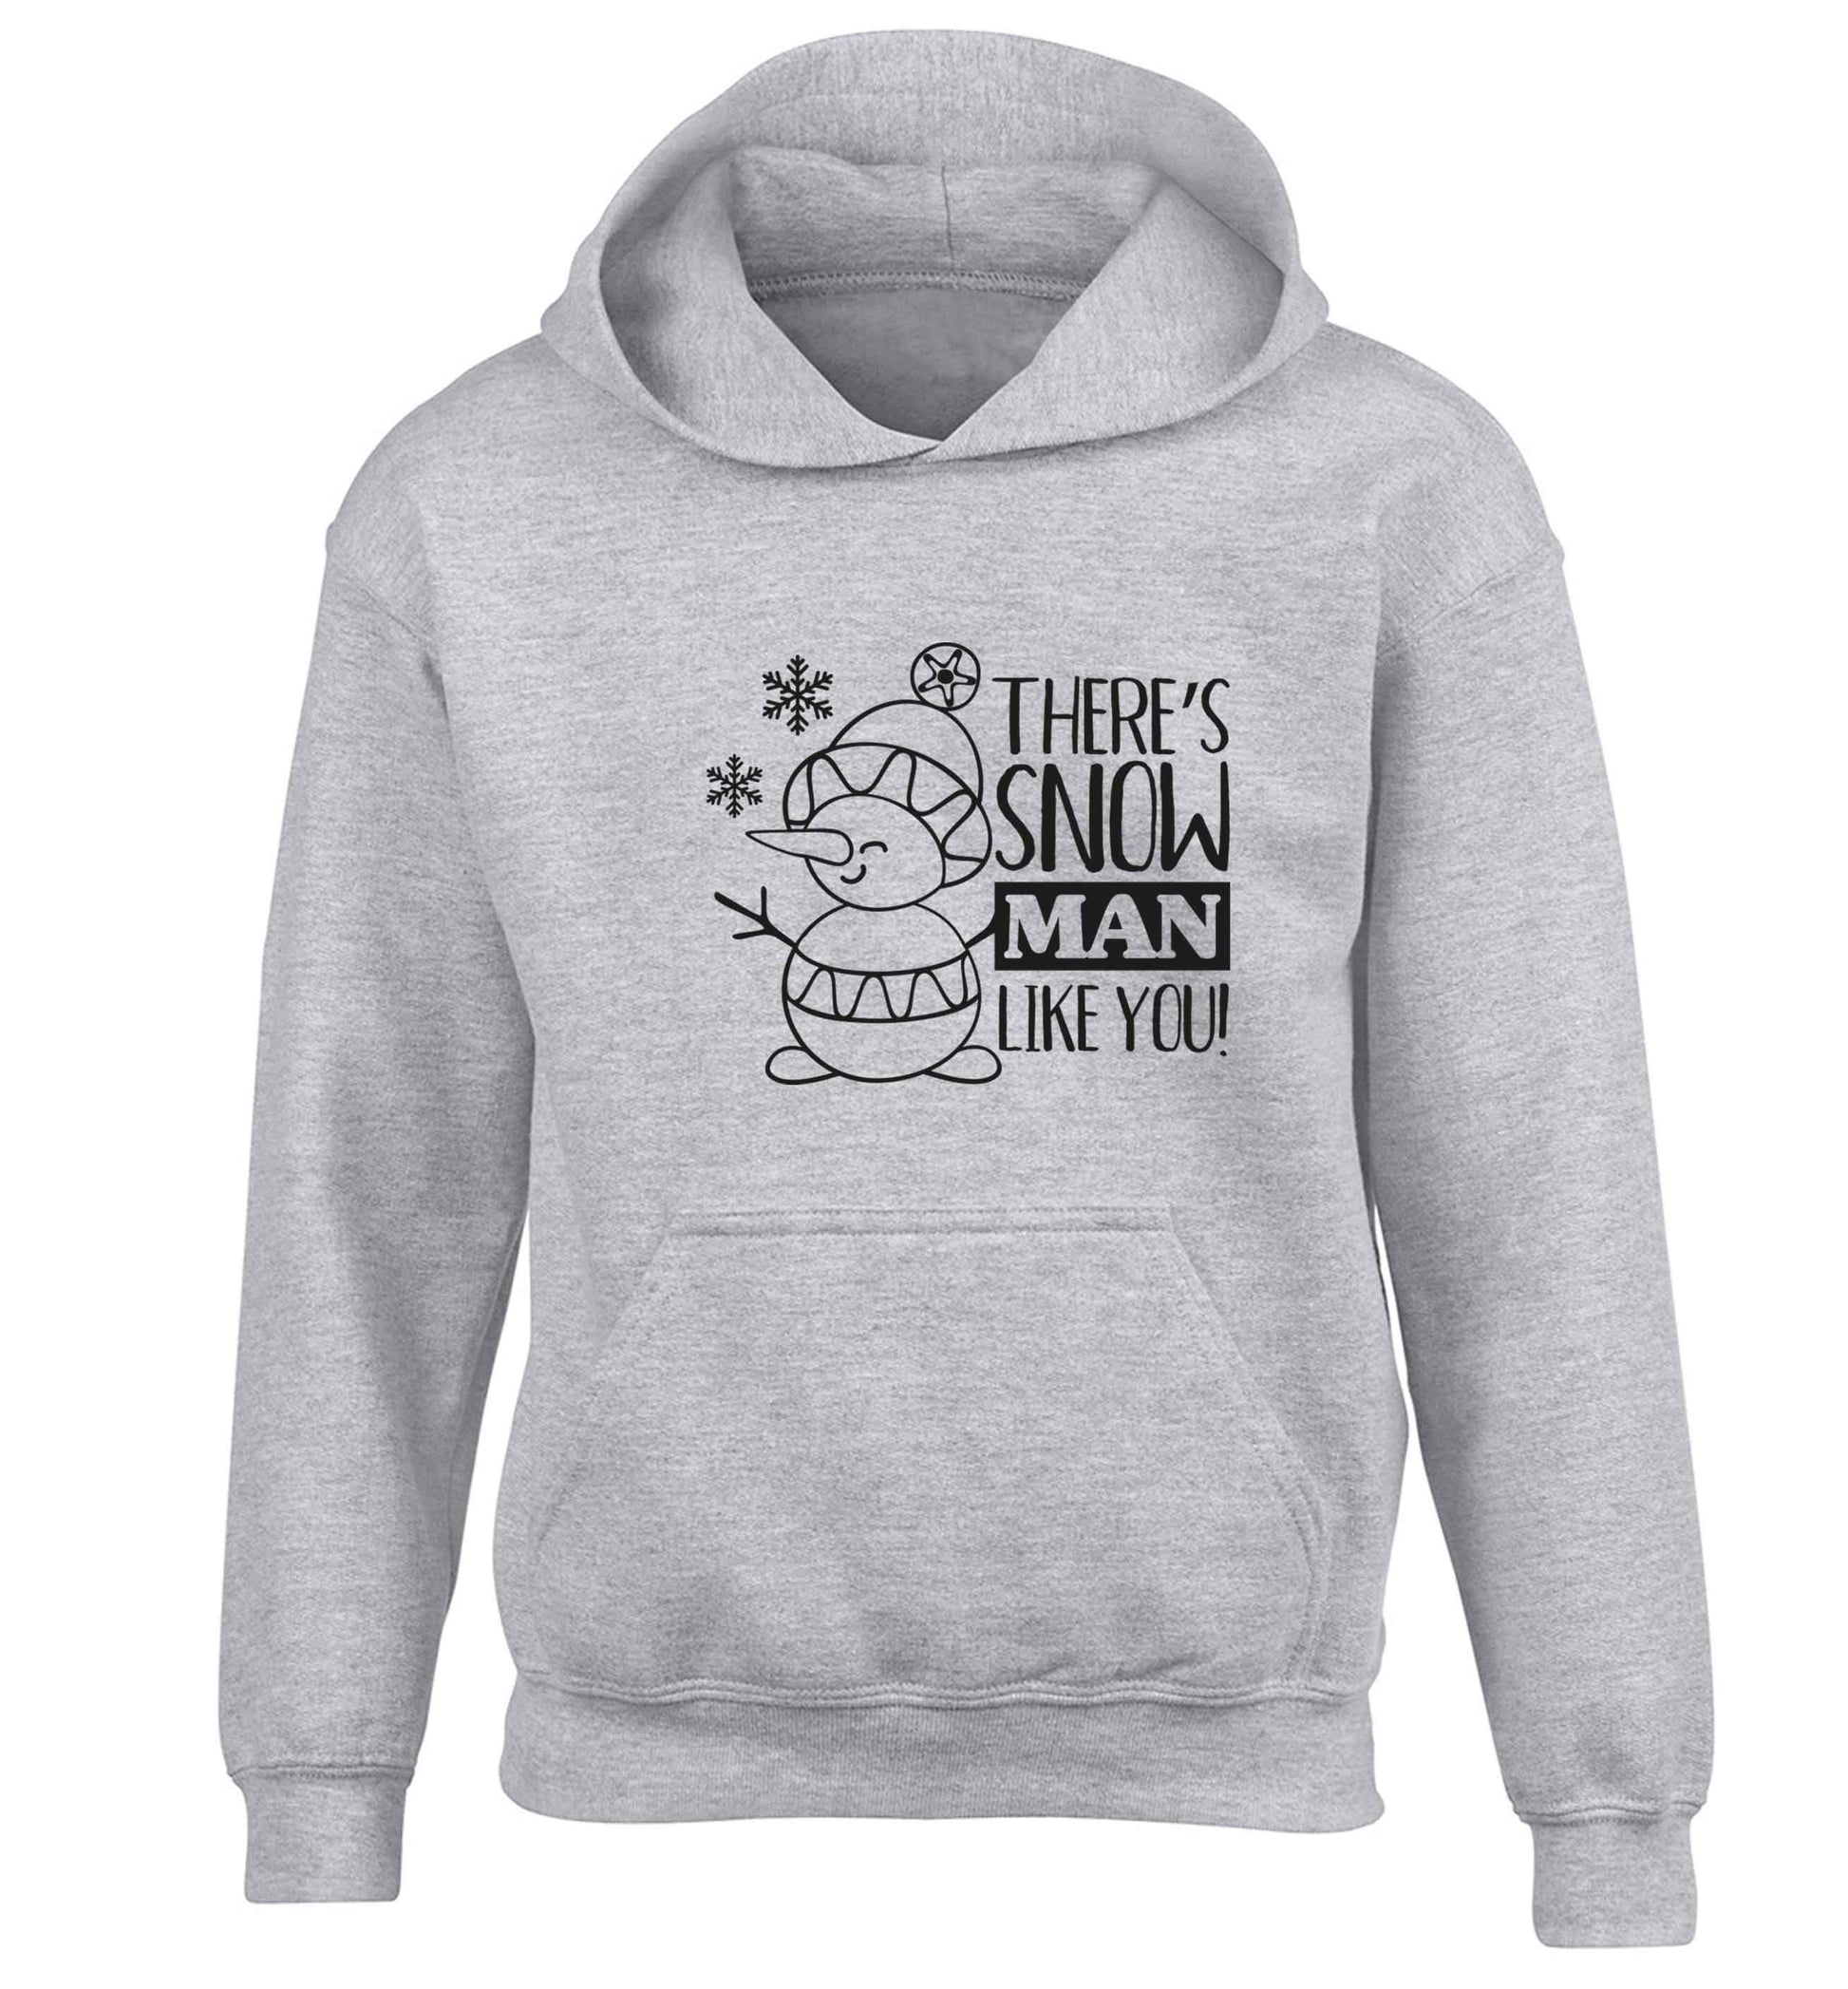 There's snow man like you children's grey hoodie 12-13 Years